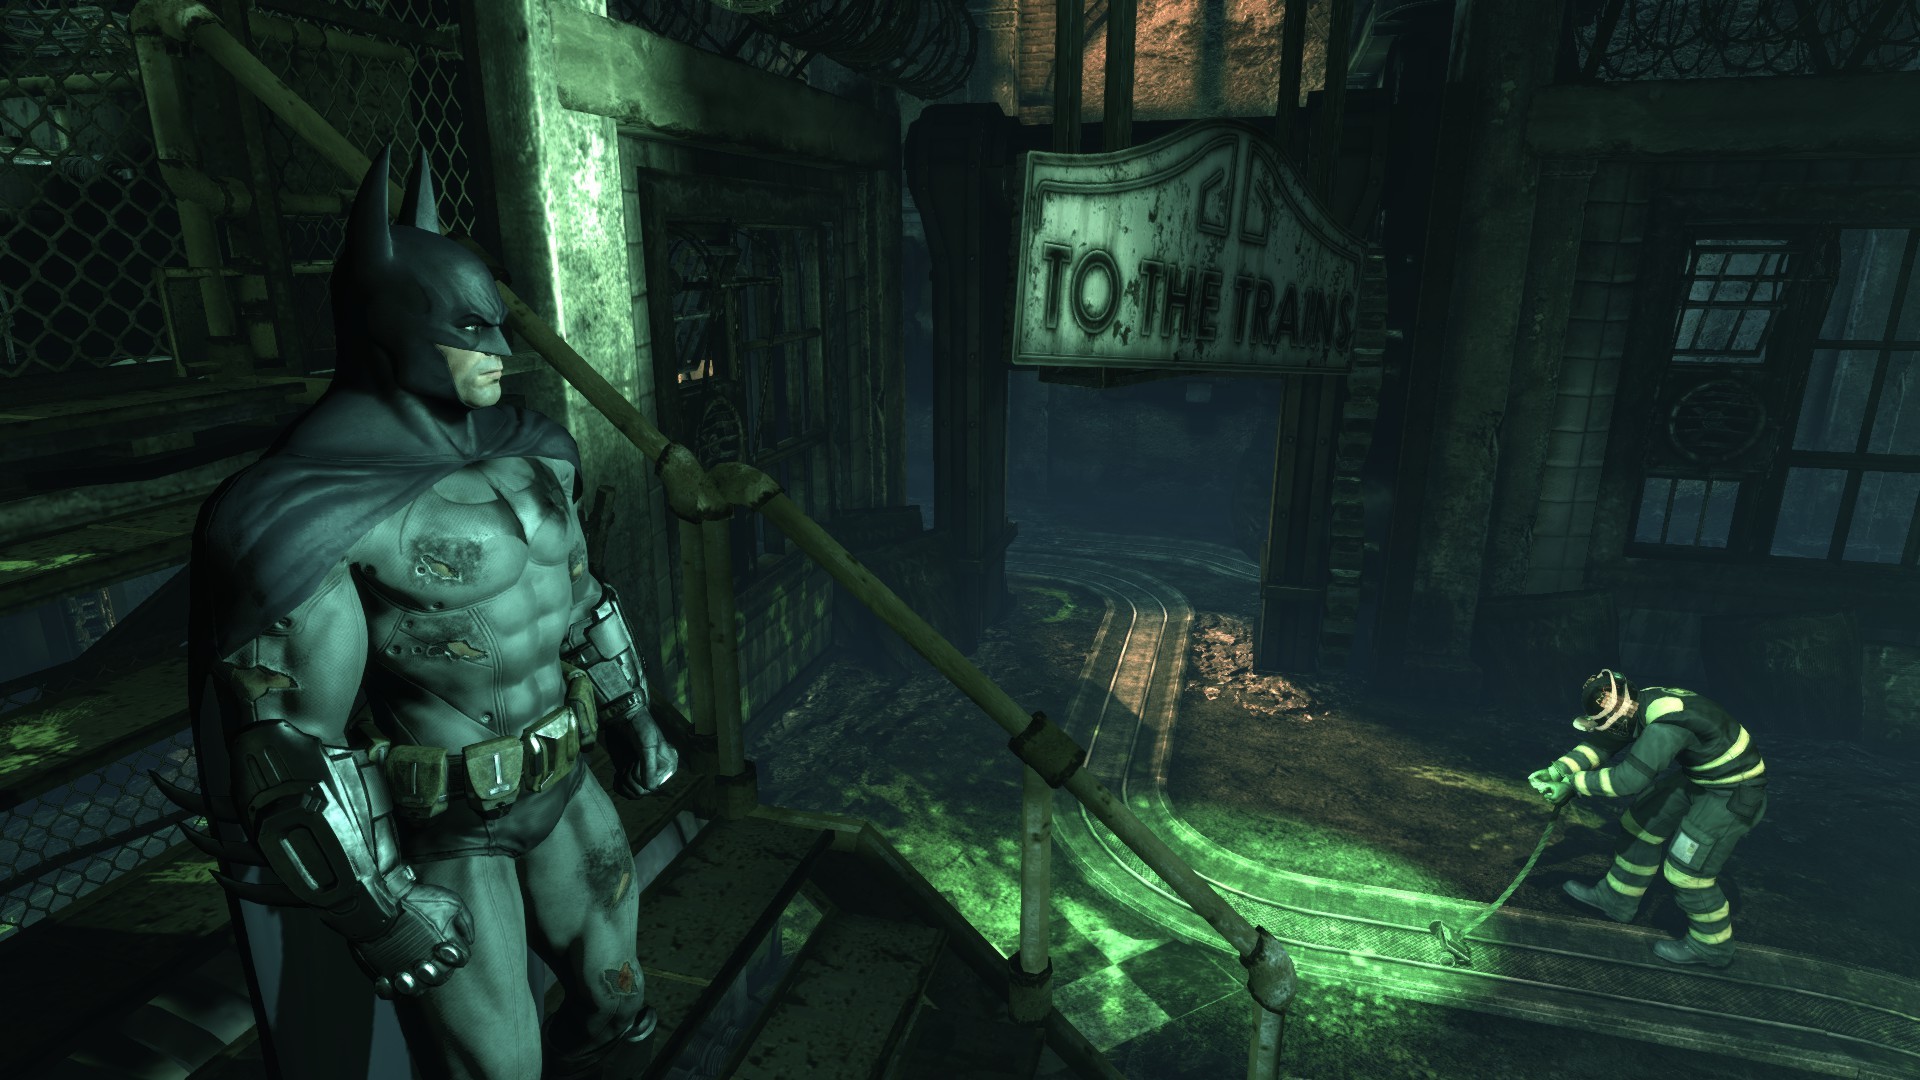 1920x1080 When the tip "Takedown" pop ups - press it and Batman will remind Riddler  that he has not only the sharpest mind, but a heavy fists too.